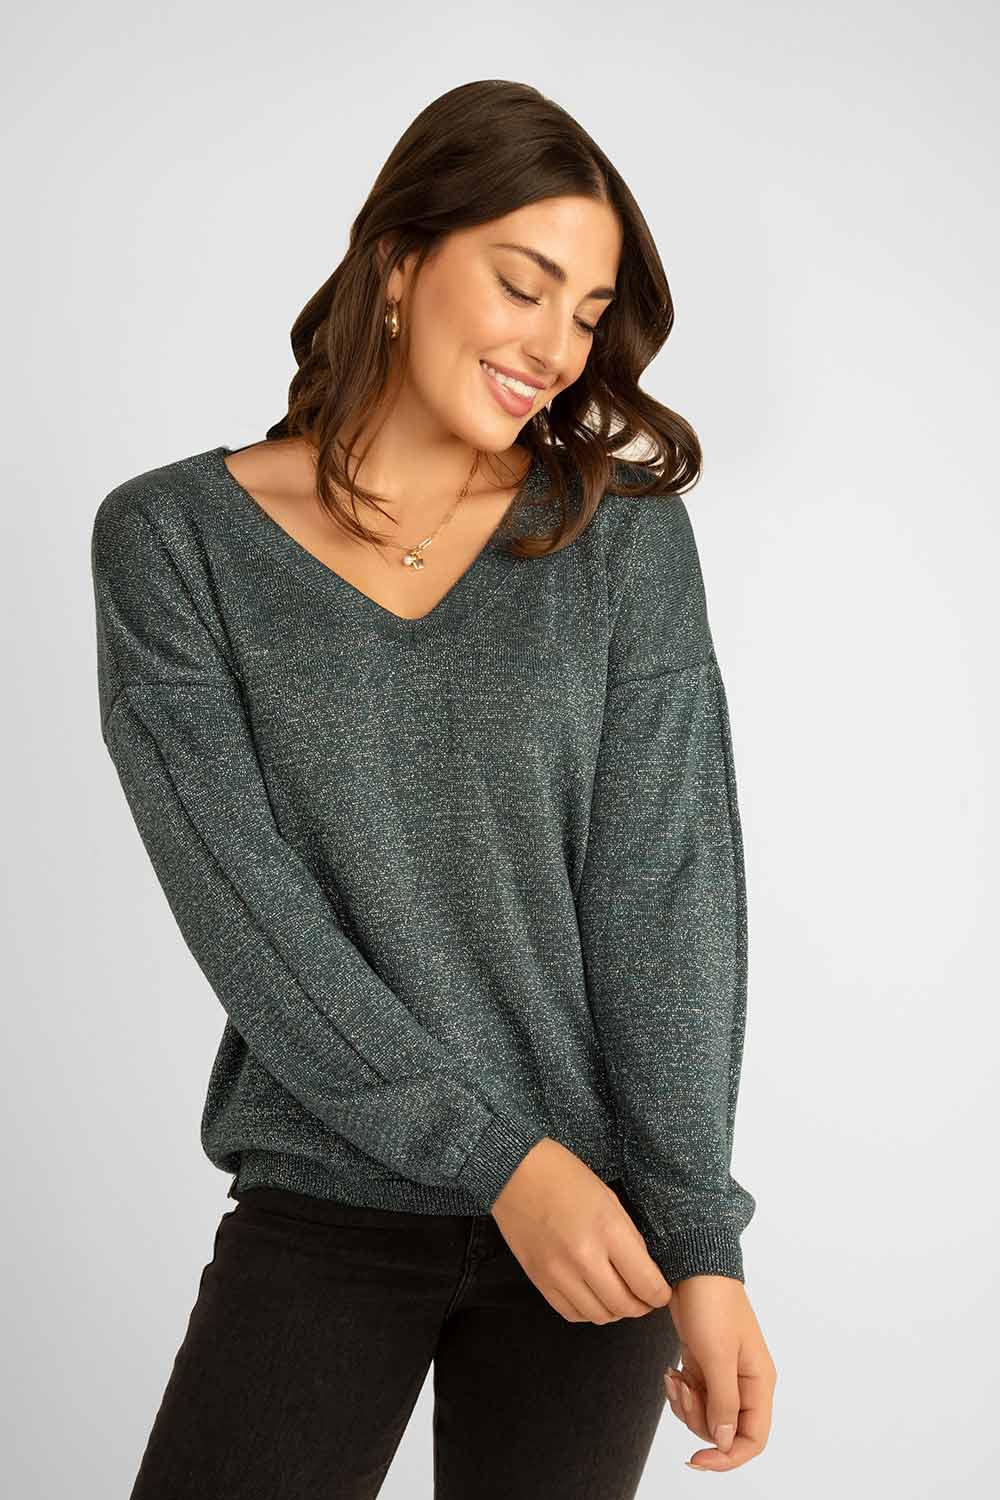 Women's Clothing ELISSIA (SL804) Lurex V-Neck Sweater in TEAL